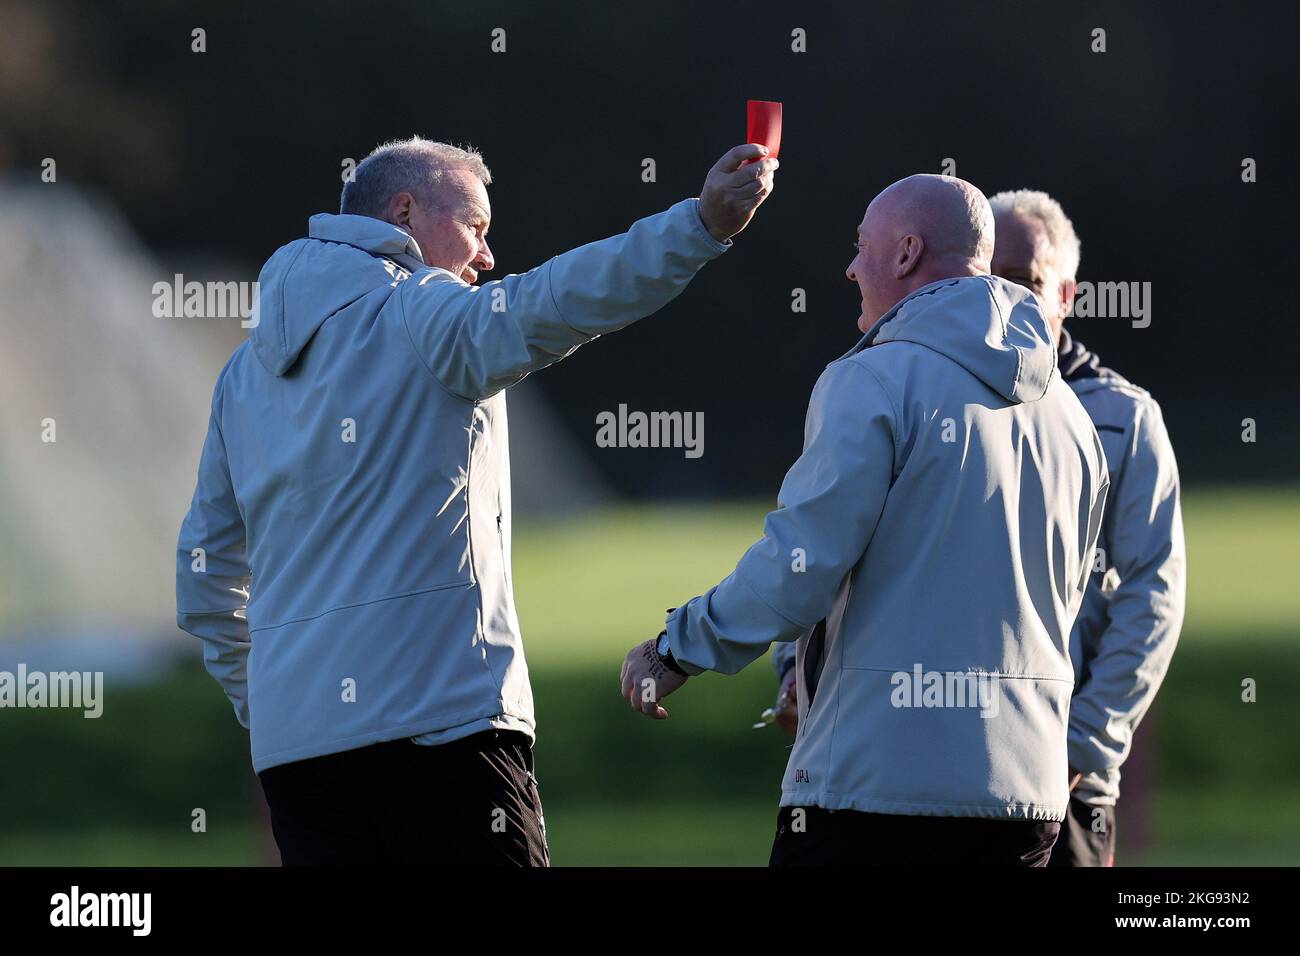 Cardiff, UK. 22nd Nov, 2022. Wayne Pivac, the head coach of Wales rugby team jokingly shows a red card to a member of his coaching team during the Wales rugby training session, Vale of Glamorgan on Tuesday 22nd November 2022. pic by Andrew Orchard/Andrew Orchard sports photography/ Alamy Live News Credit: Andrew Orchard sports photography/Alamy Live News Stock Photo